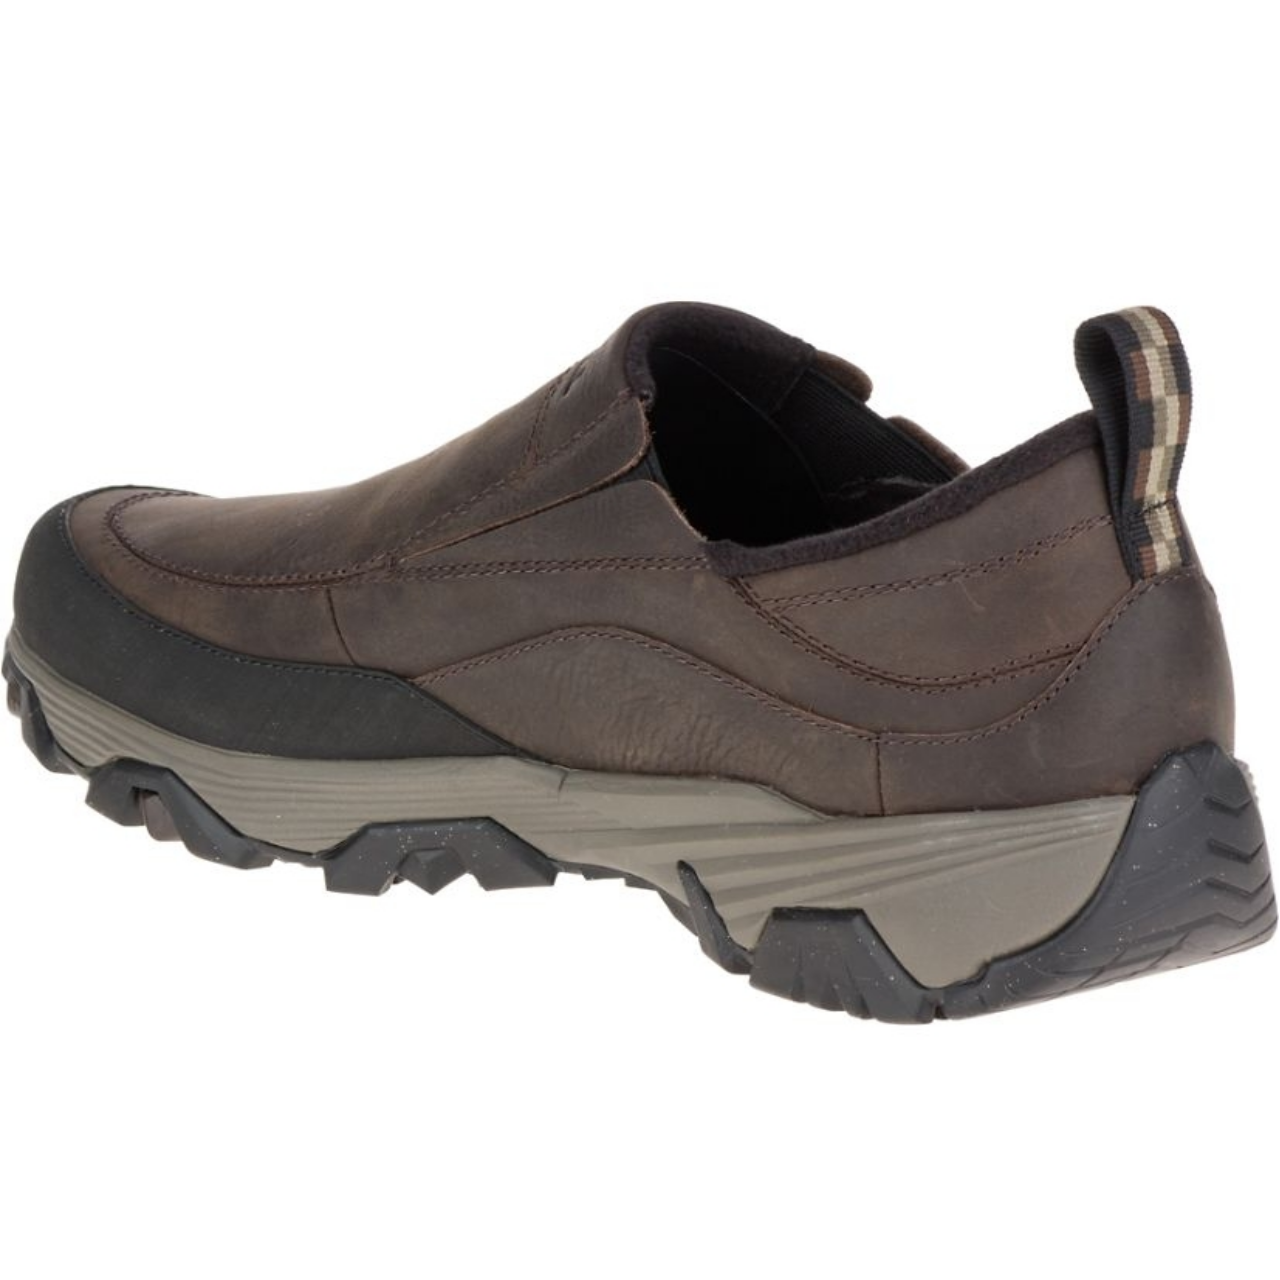 Merrell Men's Coldpack ICE+ Moc WP